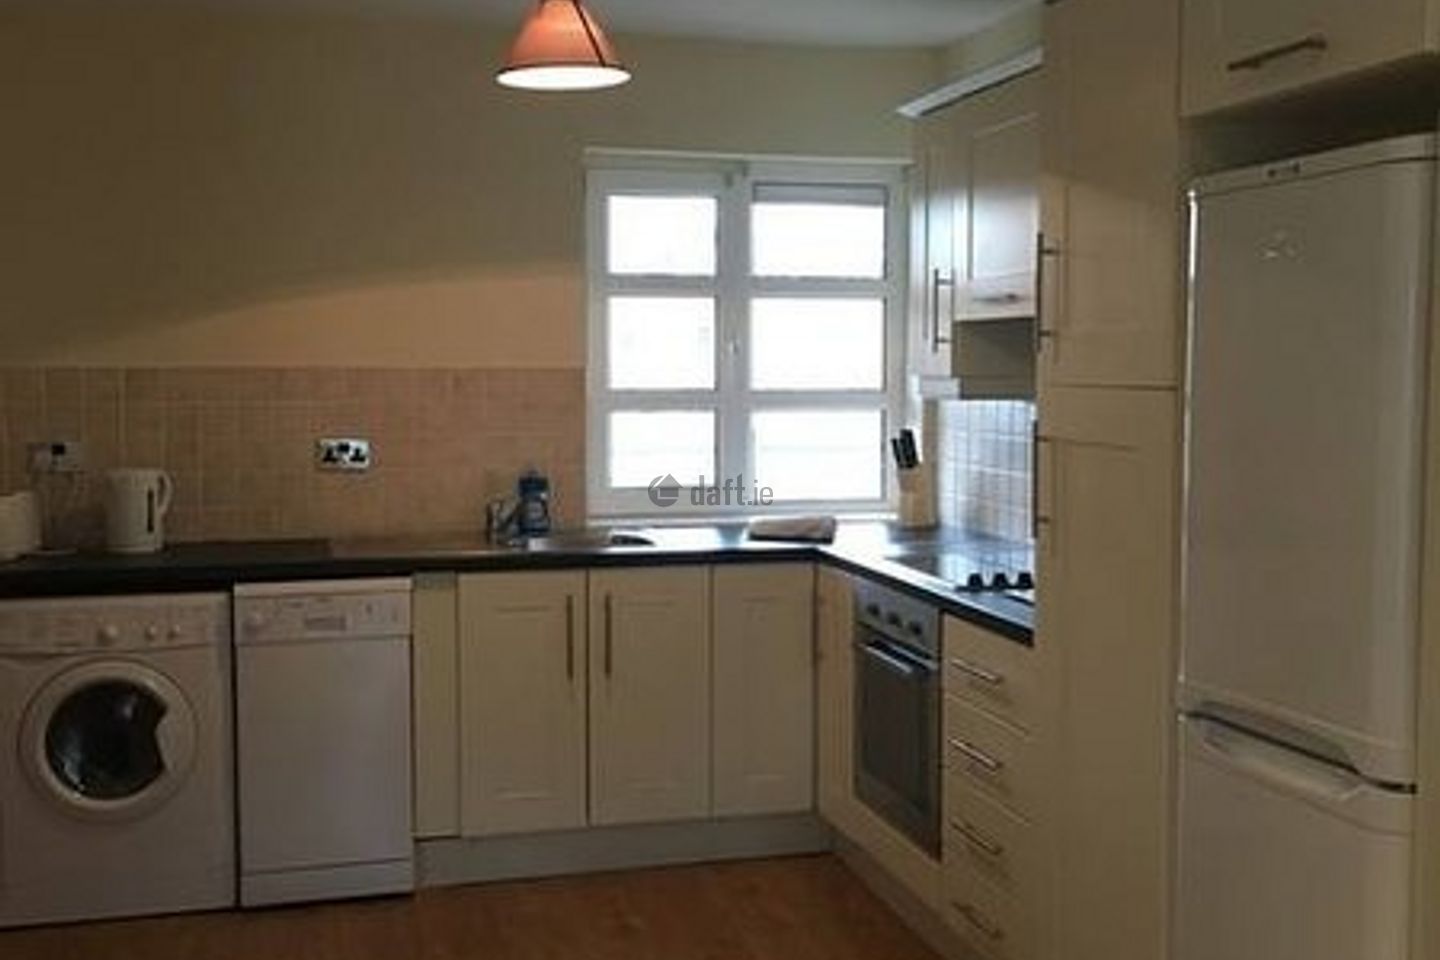 Apartment 38, Shannon Oaks Apartments, Portumna, Co. Galway